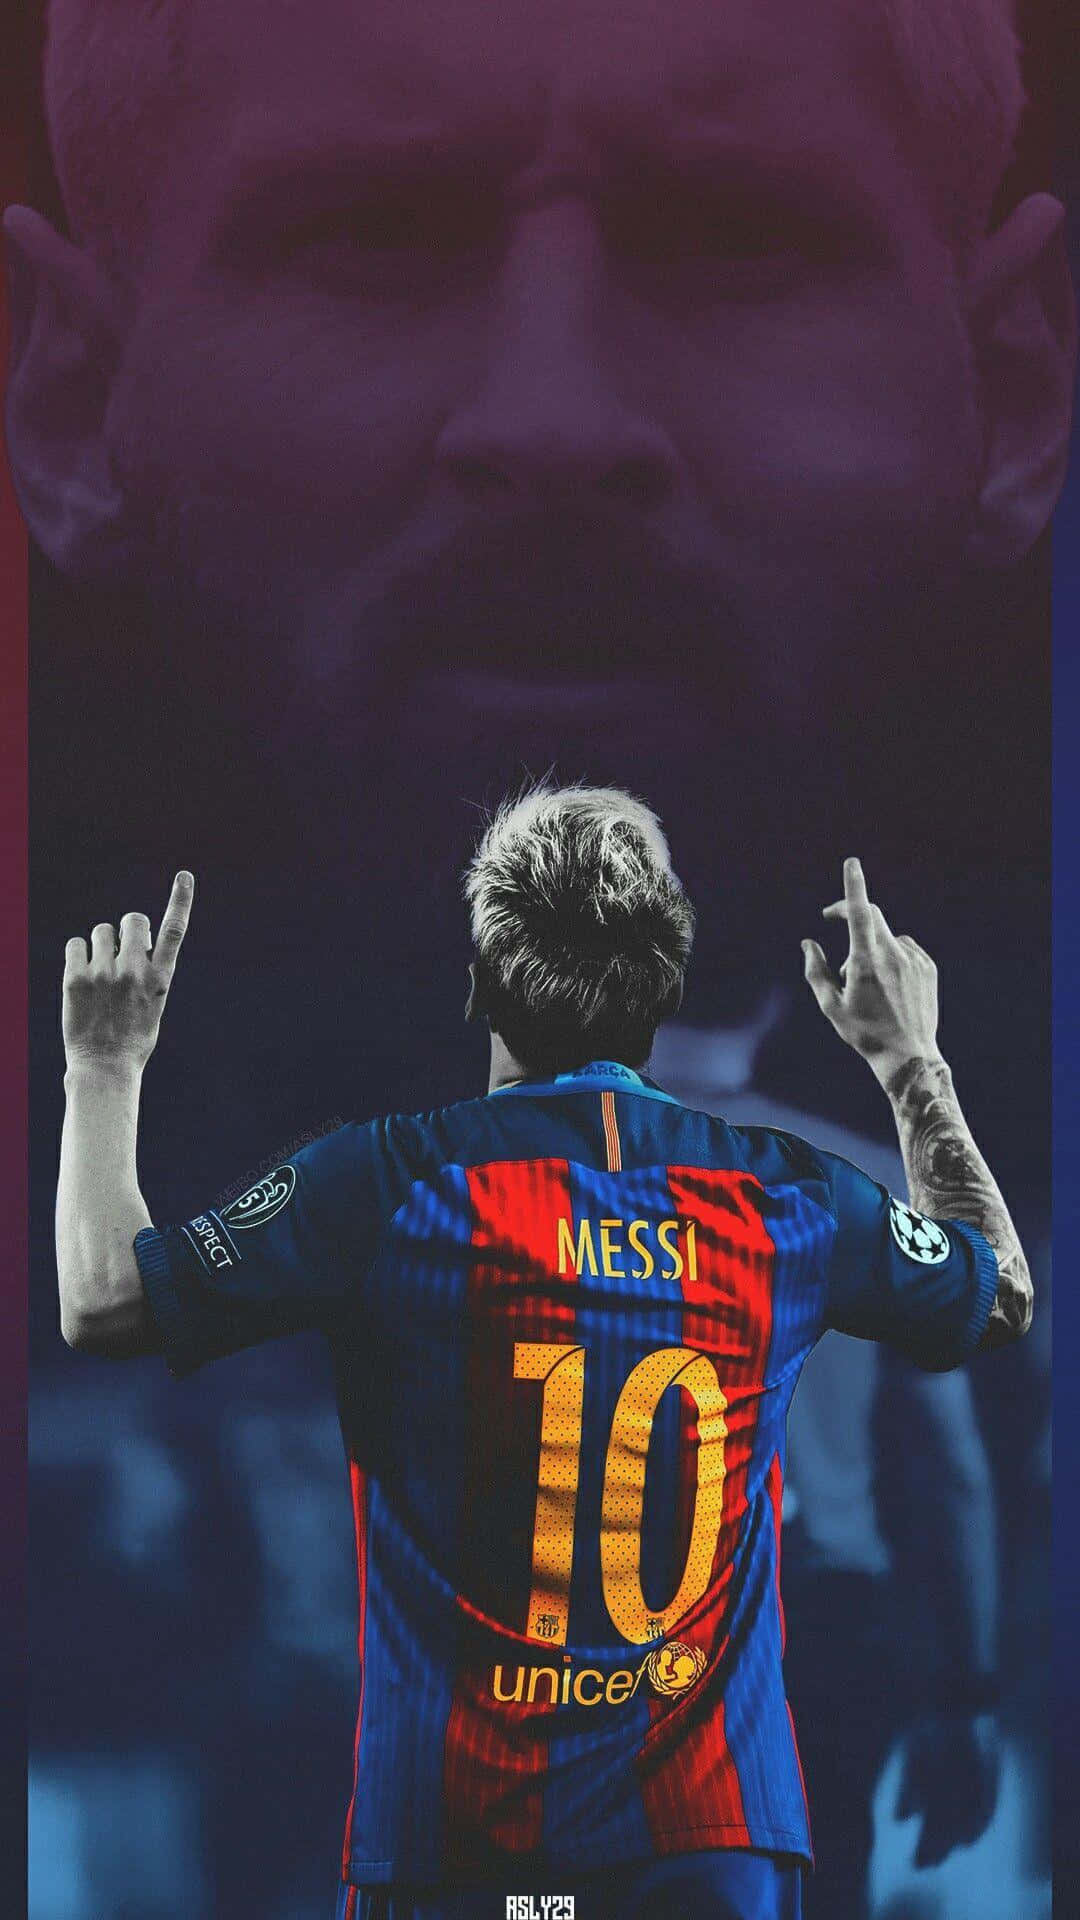 [100+] Messi Iphone Wallpapers | Wallpapers.com